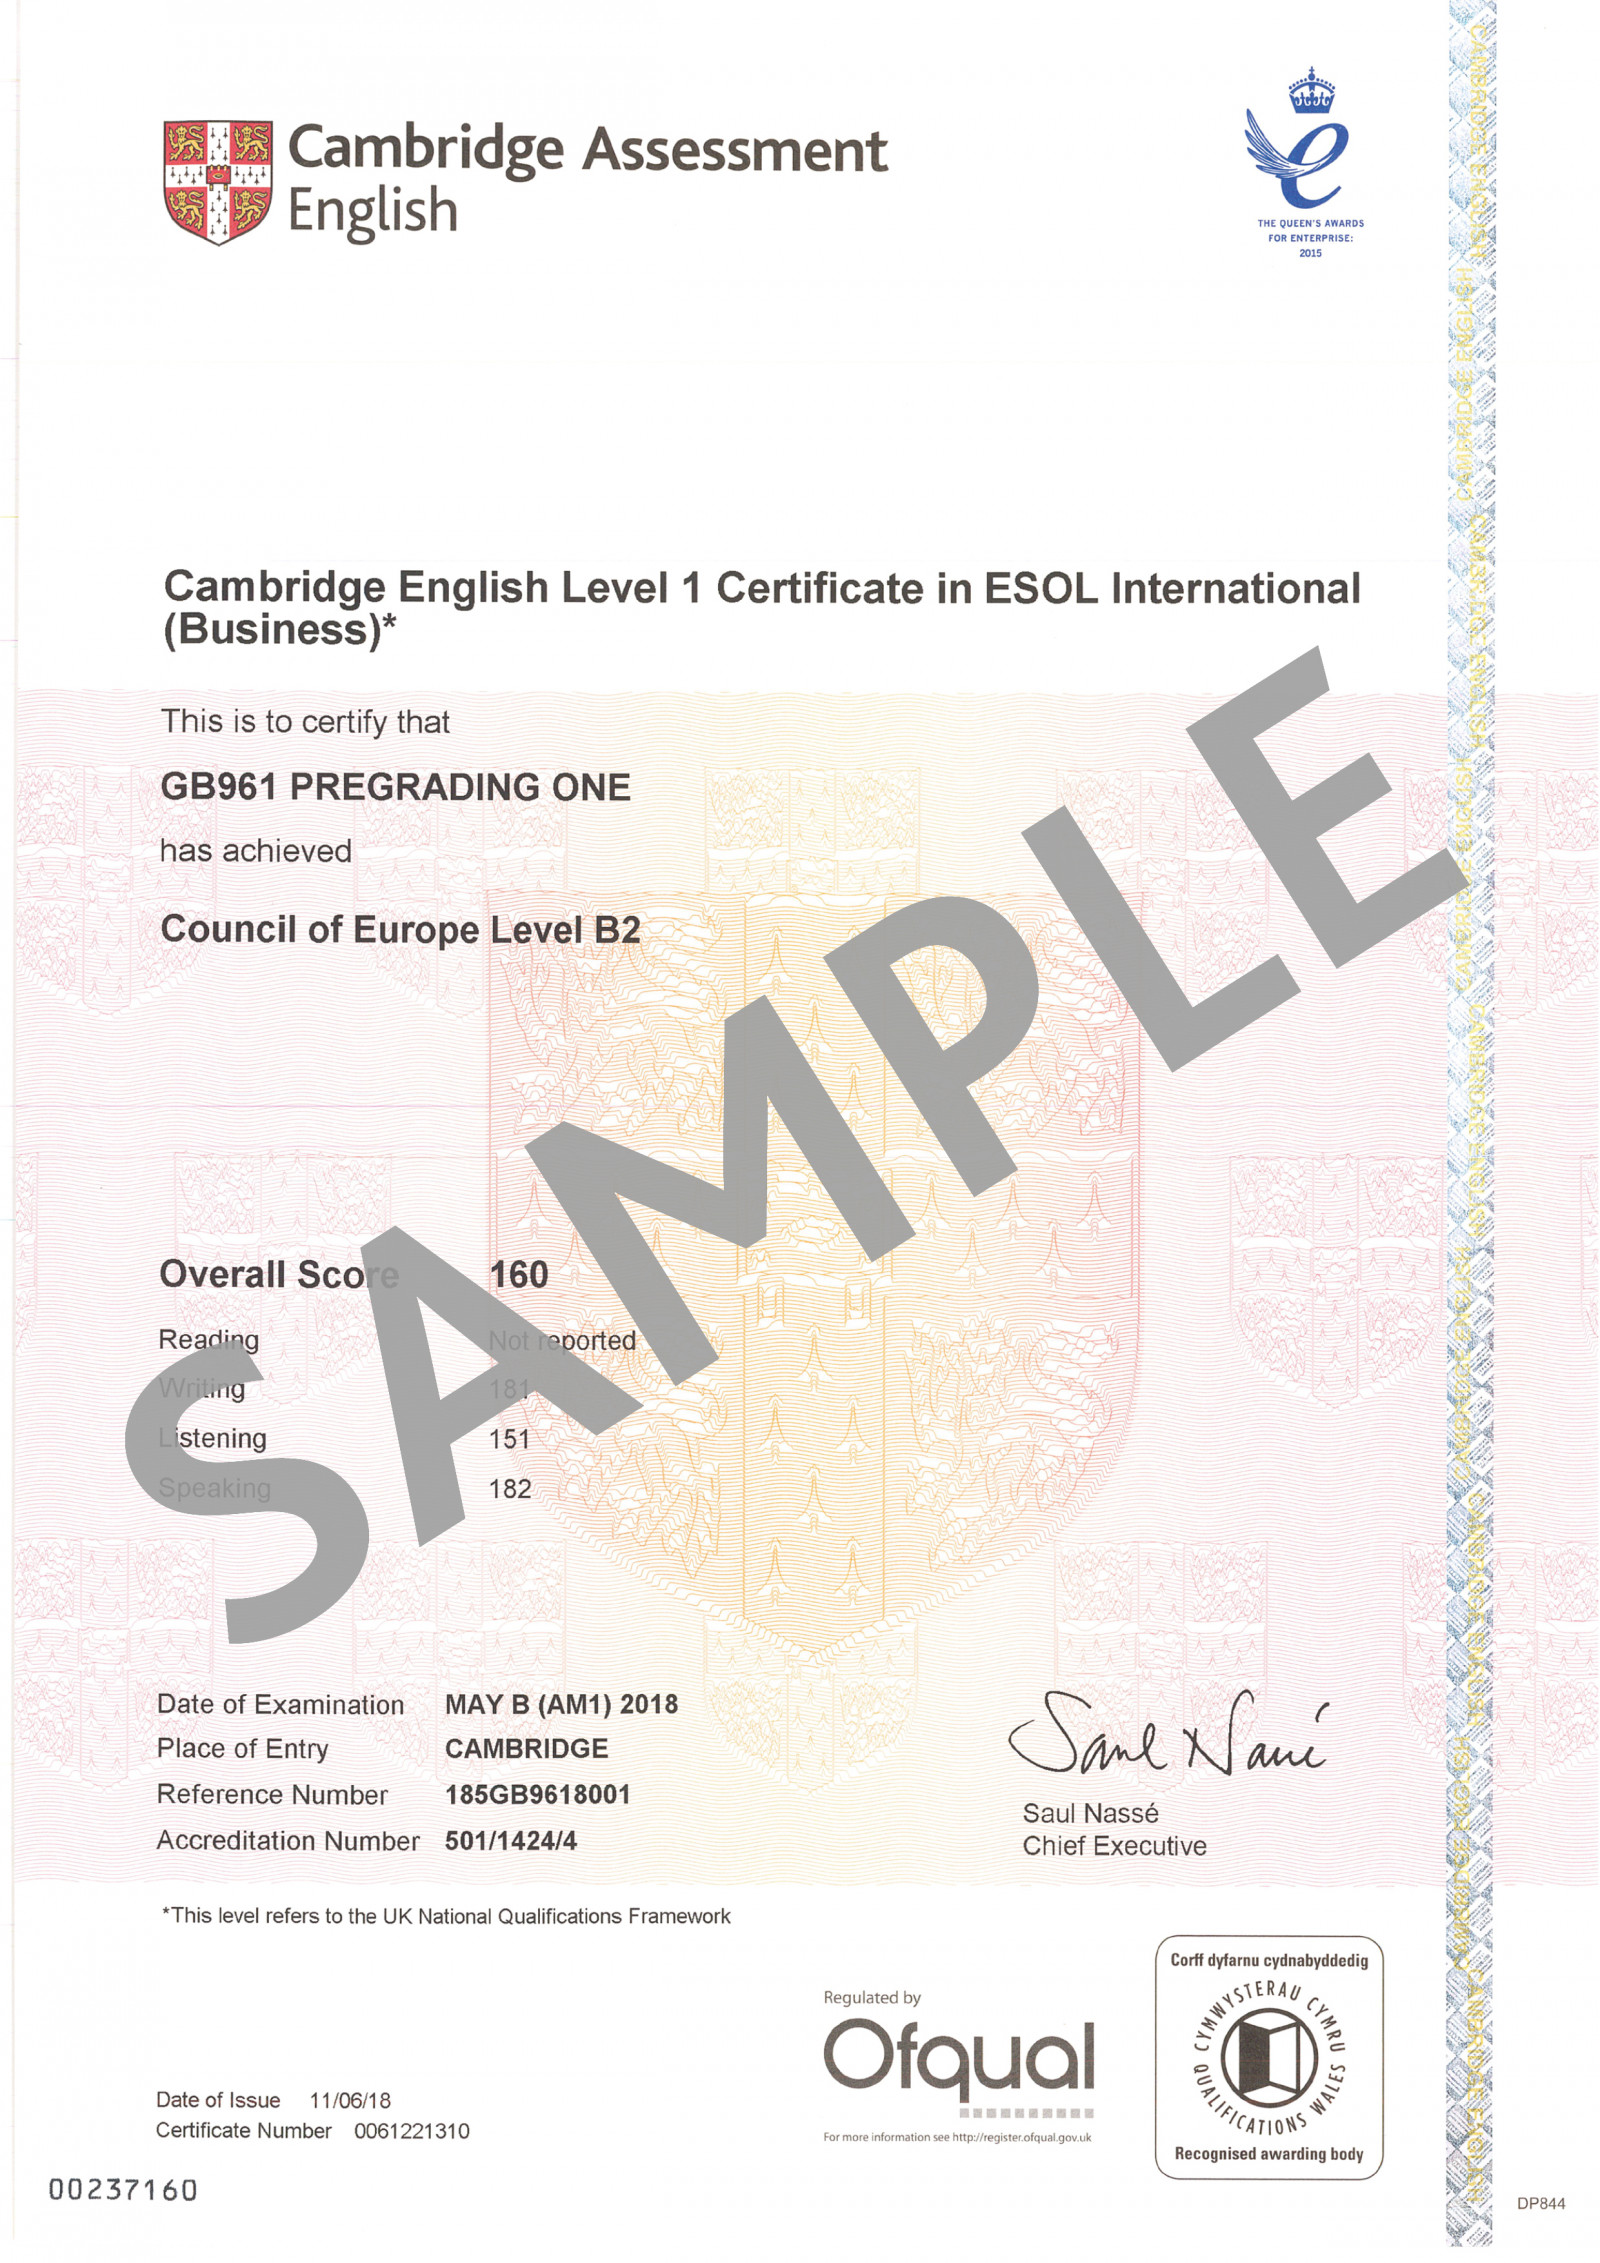 assessments-results-certificates-cambridge-english-for-life